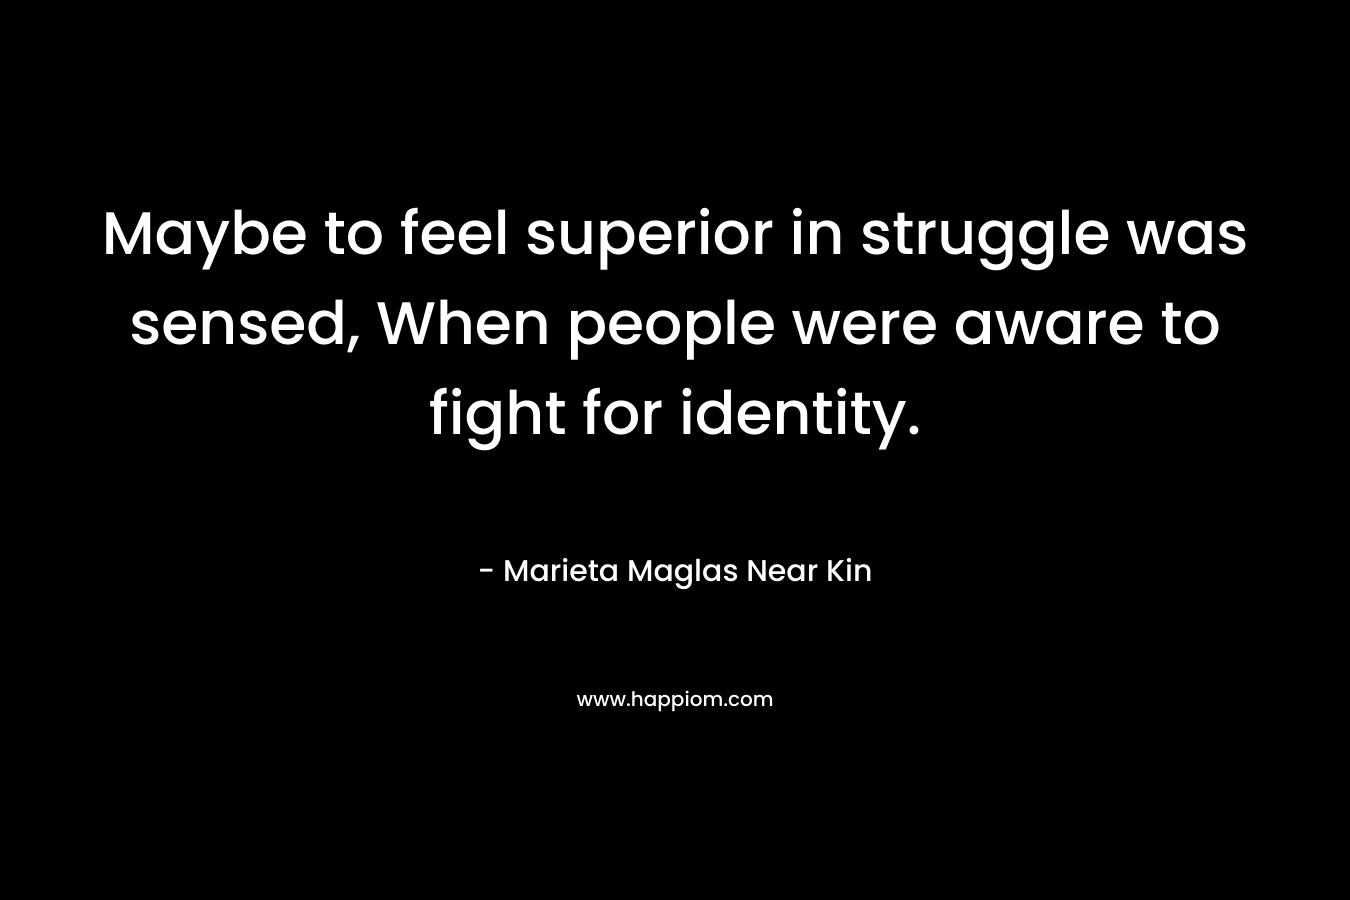 Maybe to feel superior in struggle was sensed, When people were aware to fight for identity.